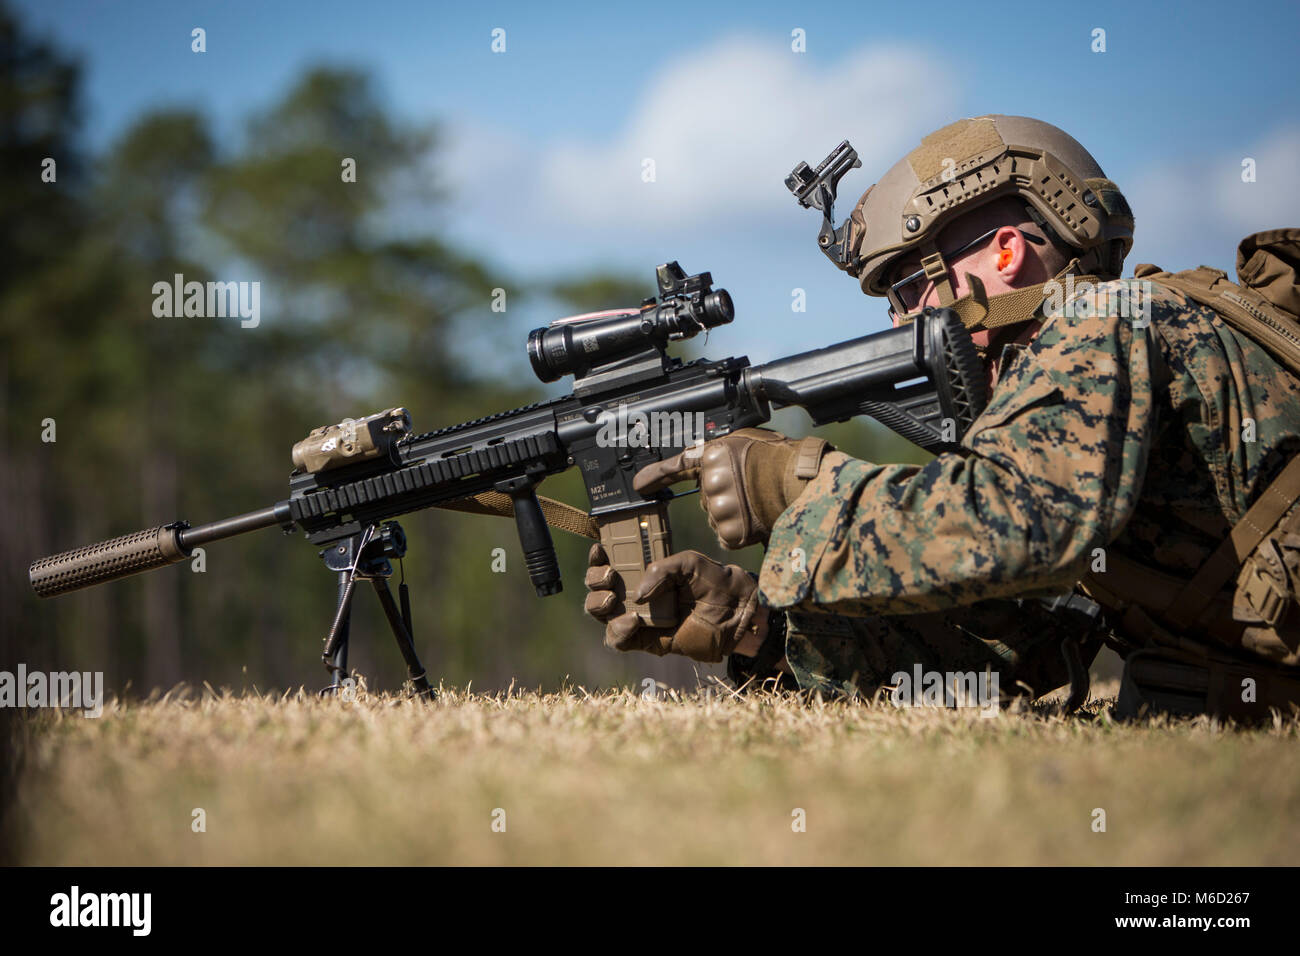 U.S. Marine Corps Lance Cpl. Albert Bridges, a rifleman with 3rd Battalion, 6th Marine Regiment, 2nd Marine Division (2d MARDIV), inserts a magazine into an M-27 Infantry Assault Rifle while conducting a Table-3 Live Fire 3 Exercise during the 2d MARDIV Infantry Squad Movement Evaluation (ISME) on Camp Lejeune, N.C., Feb. 21, 2018. The 2d MARDIV ISME evaluates the tactical proficiency of infantry rifle squads and determine, under simulated combat conditions, the Division’s most proficient and capable squad. The competition is designed to emphasize the correct conduct of tactics, techniques, pr Stock Photo